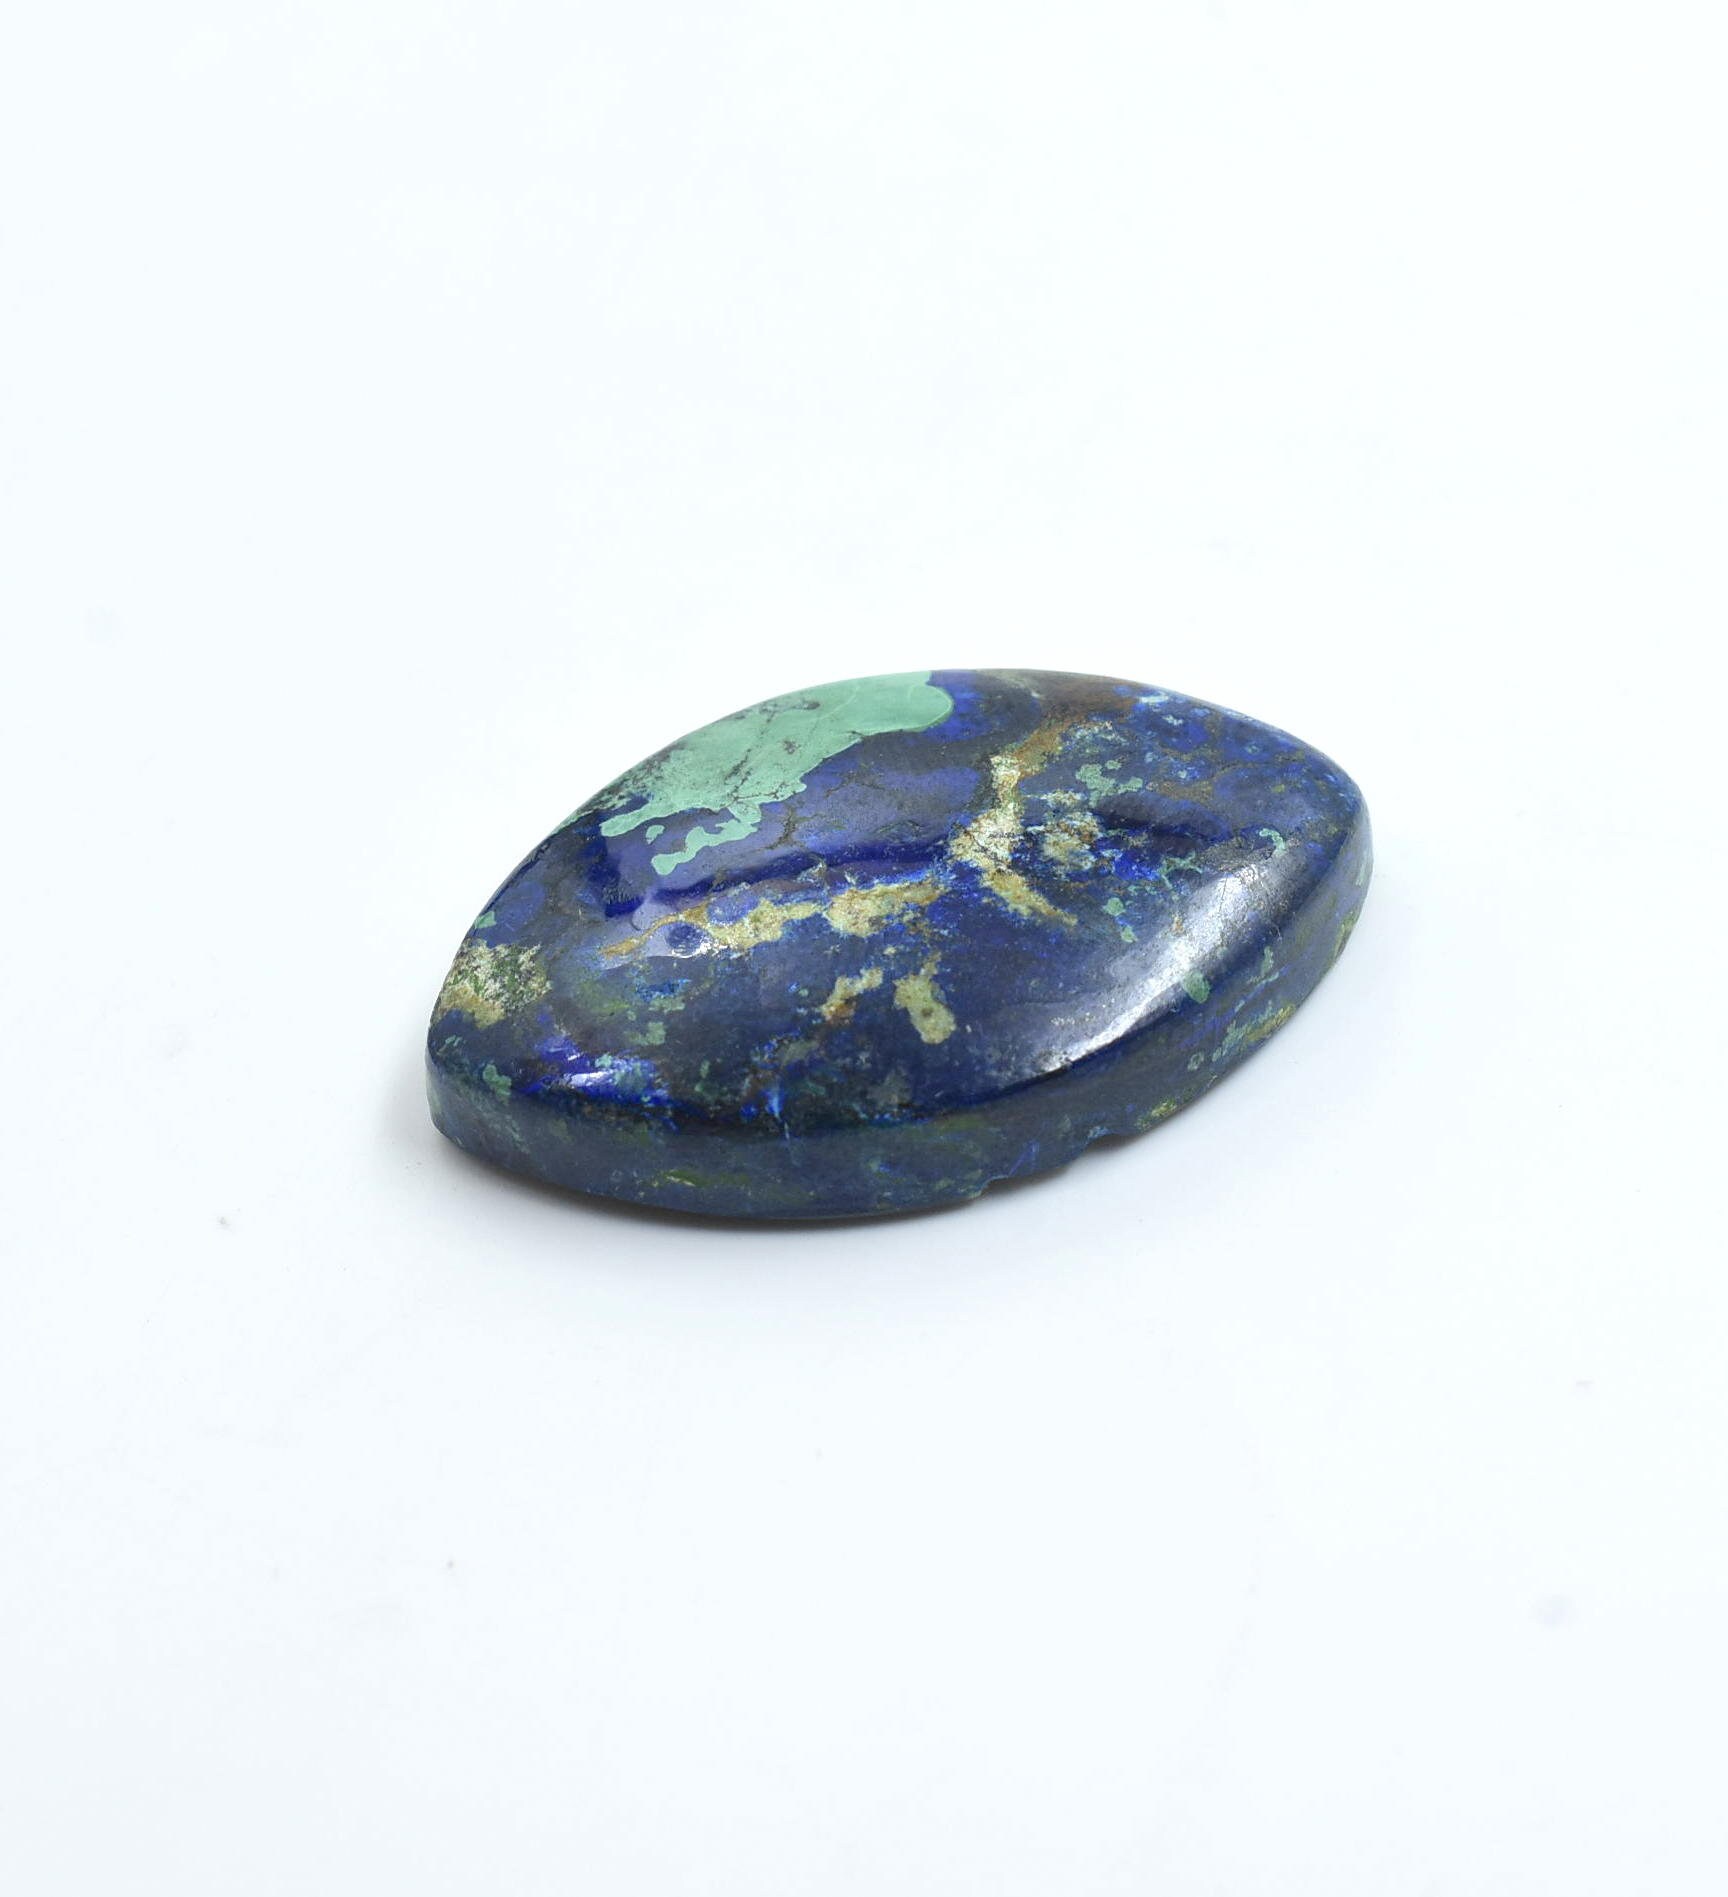 100% Natural Azurite Malachite Cabochon Good quality stone Beautiful Art Making for jewellery Ring 43.60 CARAT 33X21 MM | Save 33% - Rajasthan Living 13